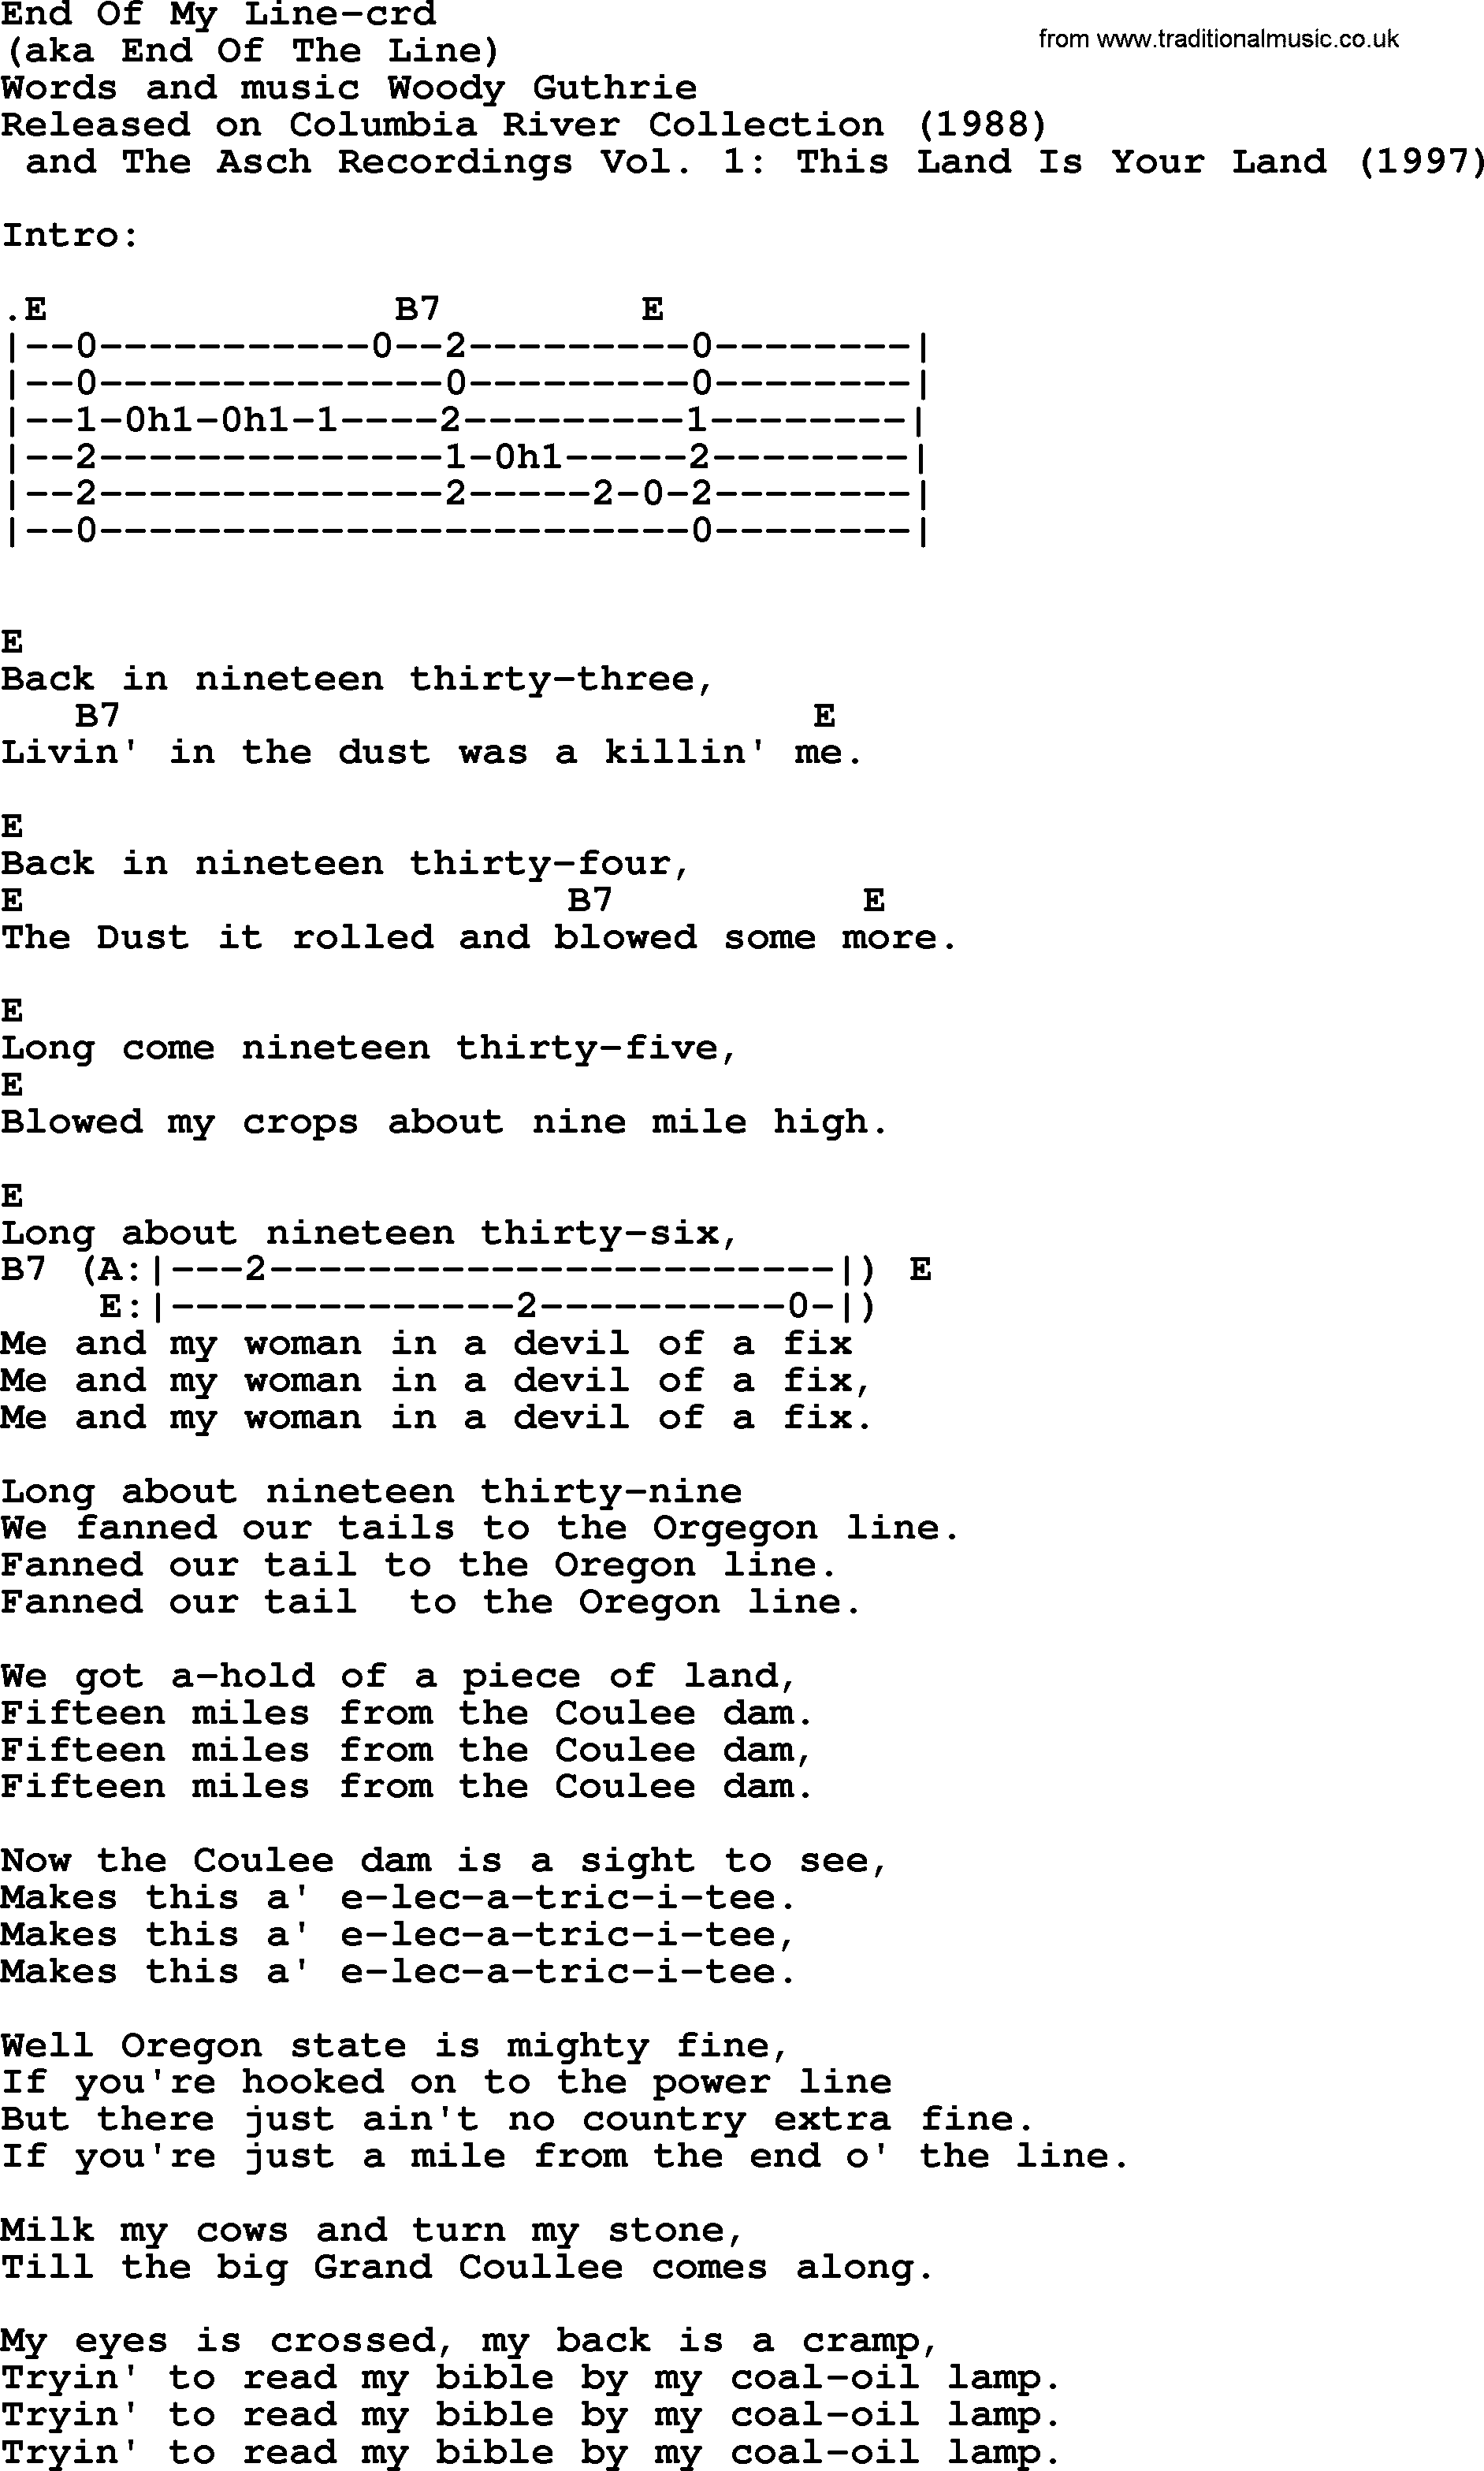 Woody Guthrie song End Of My Line lyrics and chords